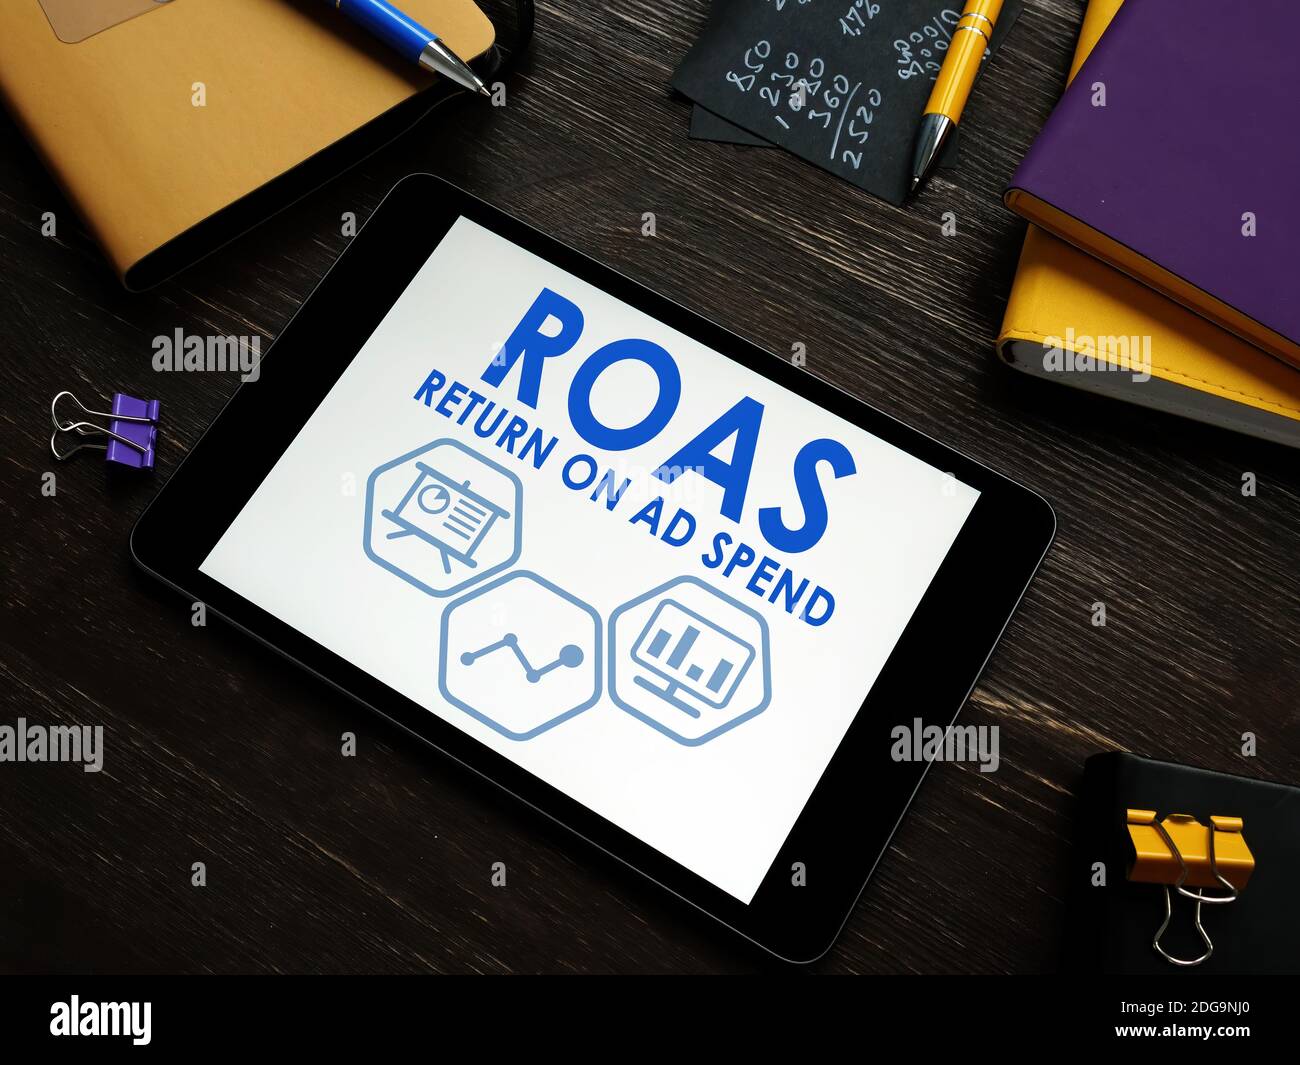 ROAS Return on Ad Spend report on a tablet. Stock Photo